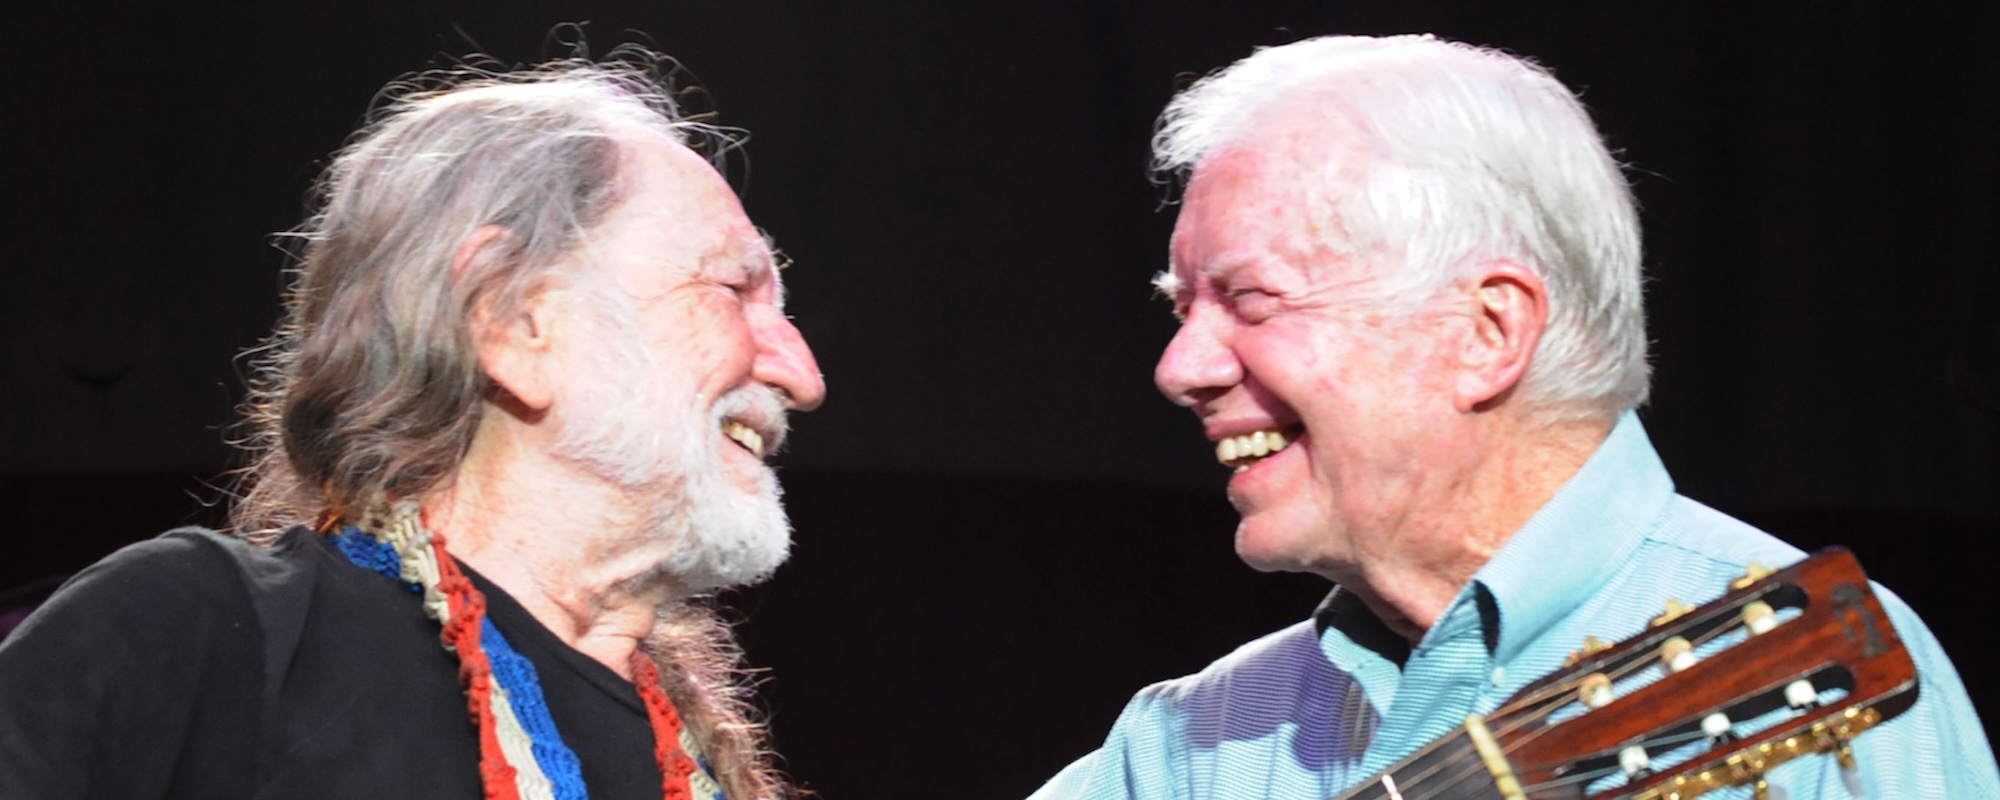 Remember When: Willie Nelson Smoked a “Fat Austin Torpedo” Joint With Jimmy Carter’s Son on the Roof of the White House